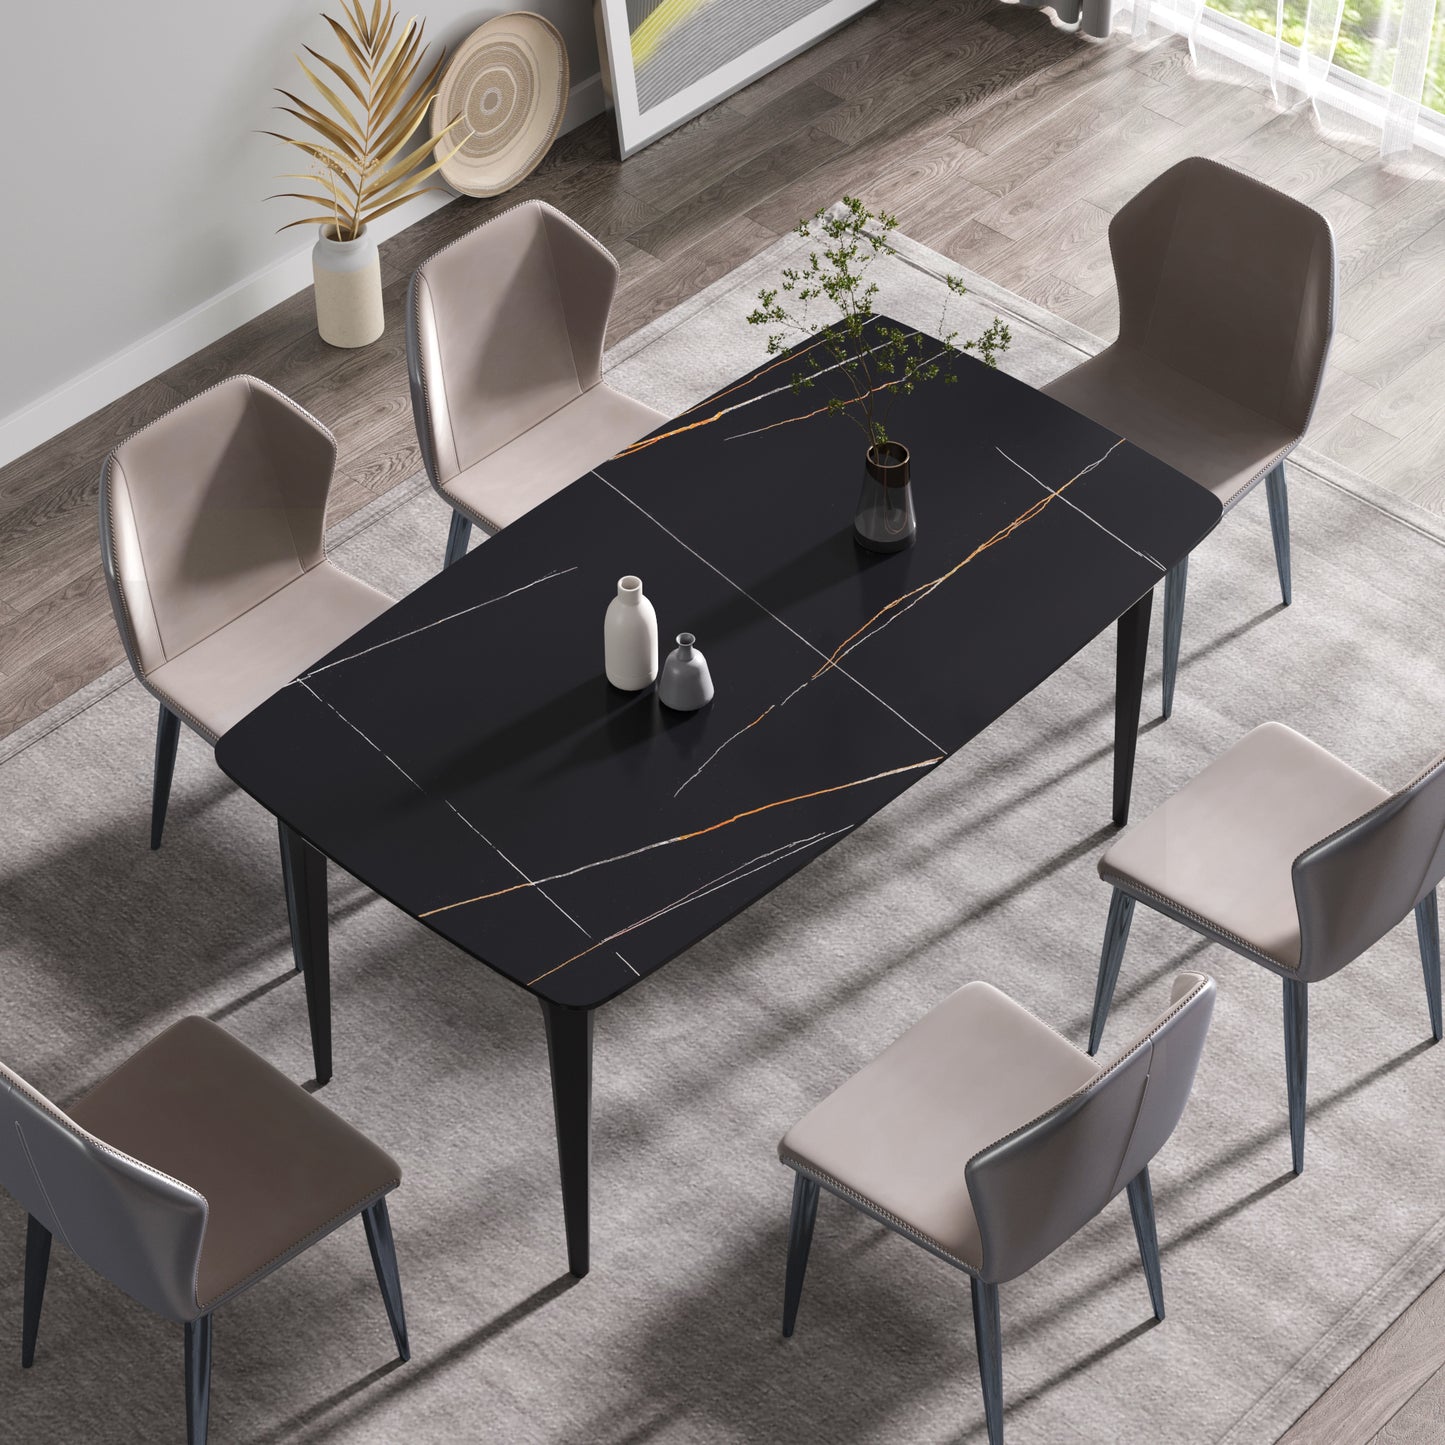 63"Modern artificial stone black curved black metal leg dining table -6 people